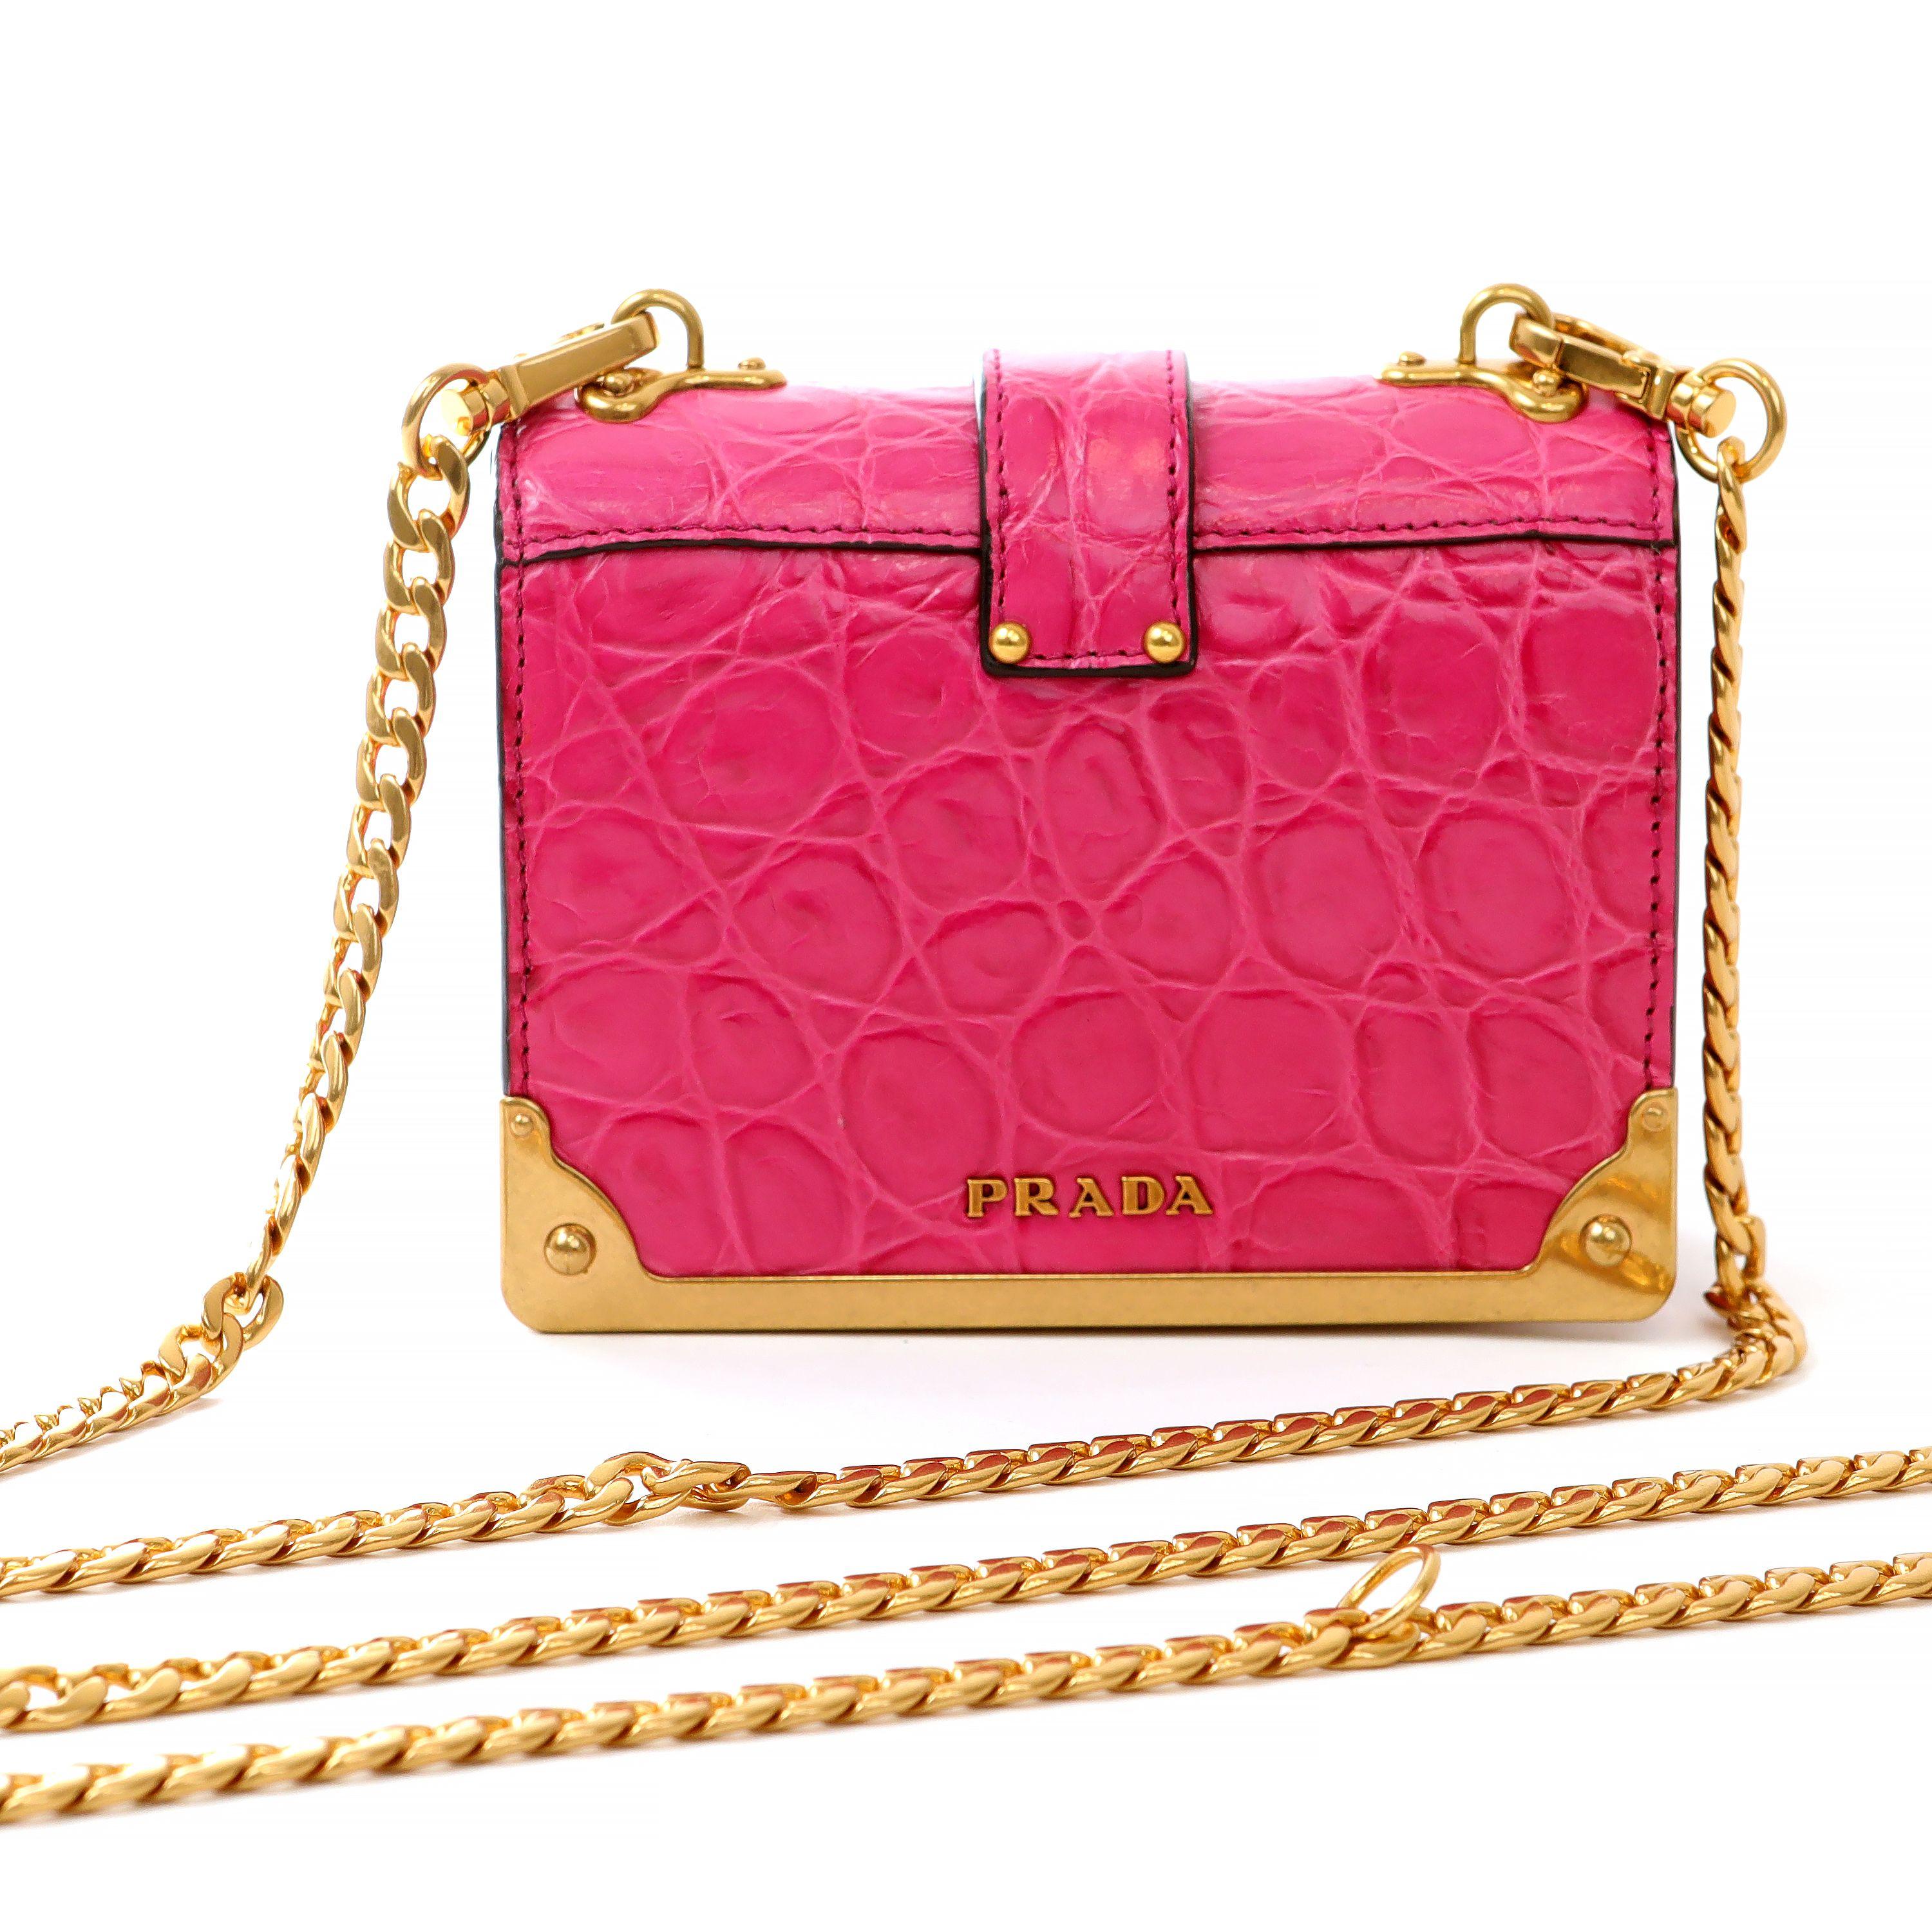 Prada Pink Crocodile Micro Cahier Bag with Gold Hardware In Excellent Condition For Sale In Palm Beach, FL